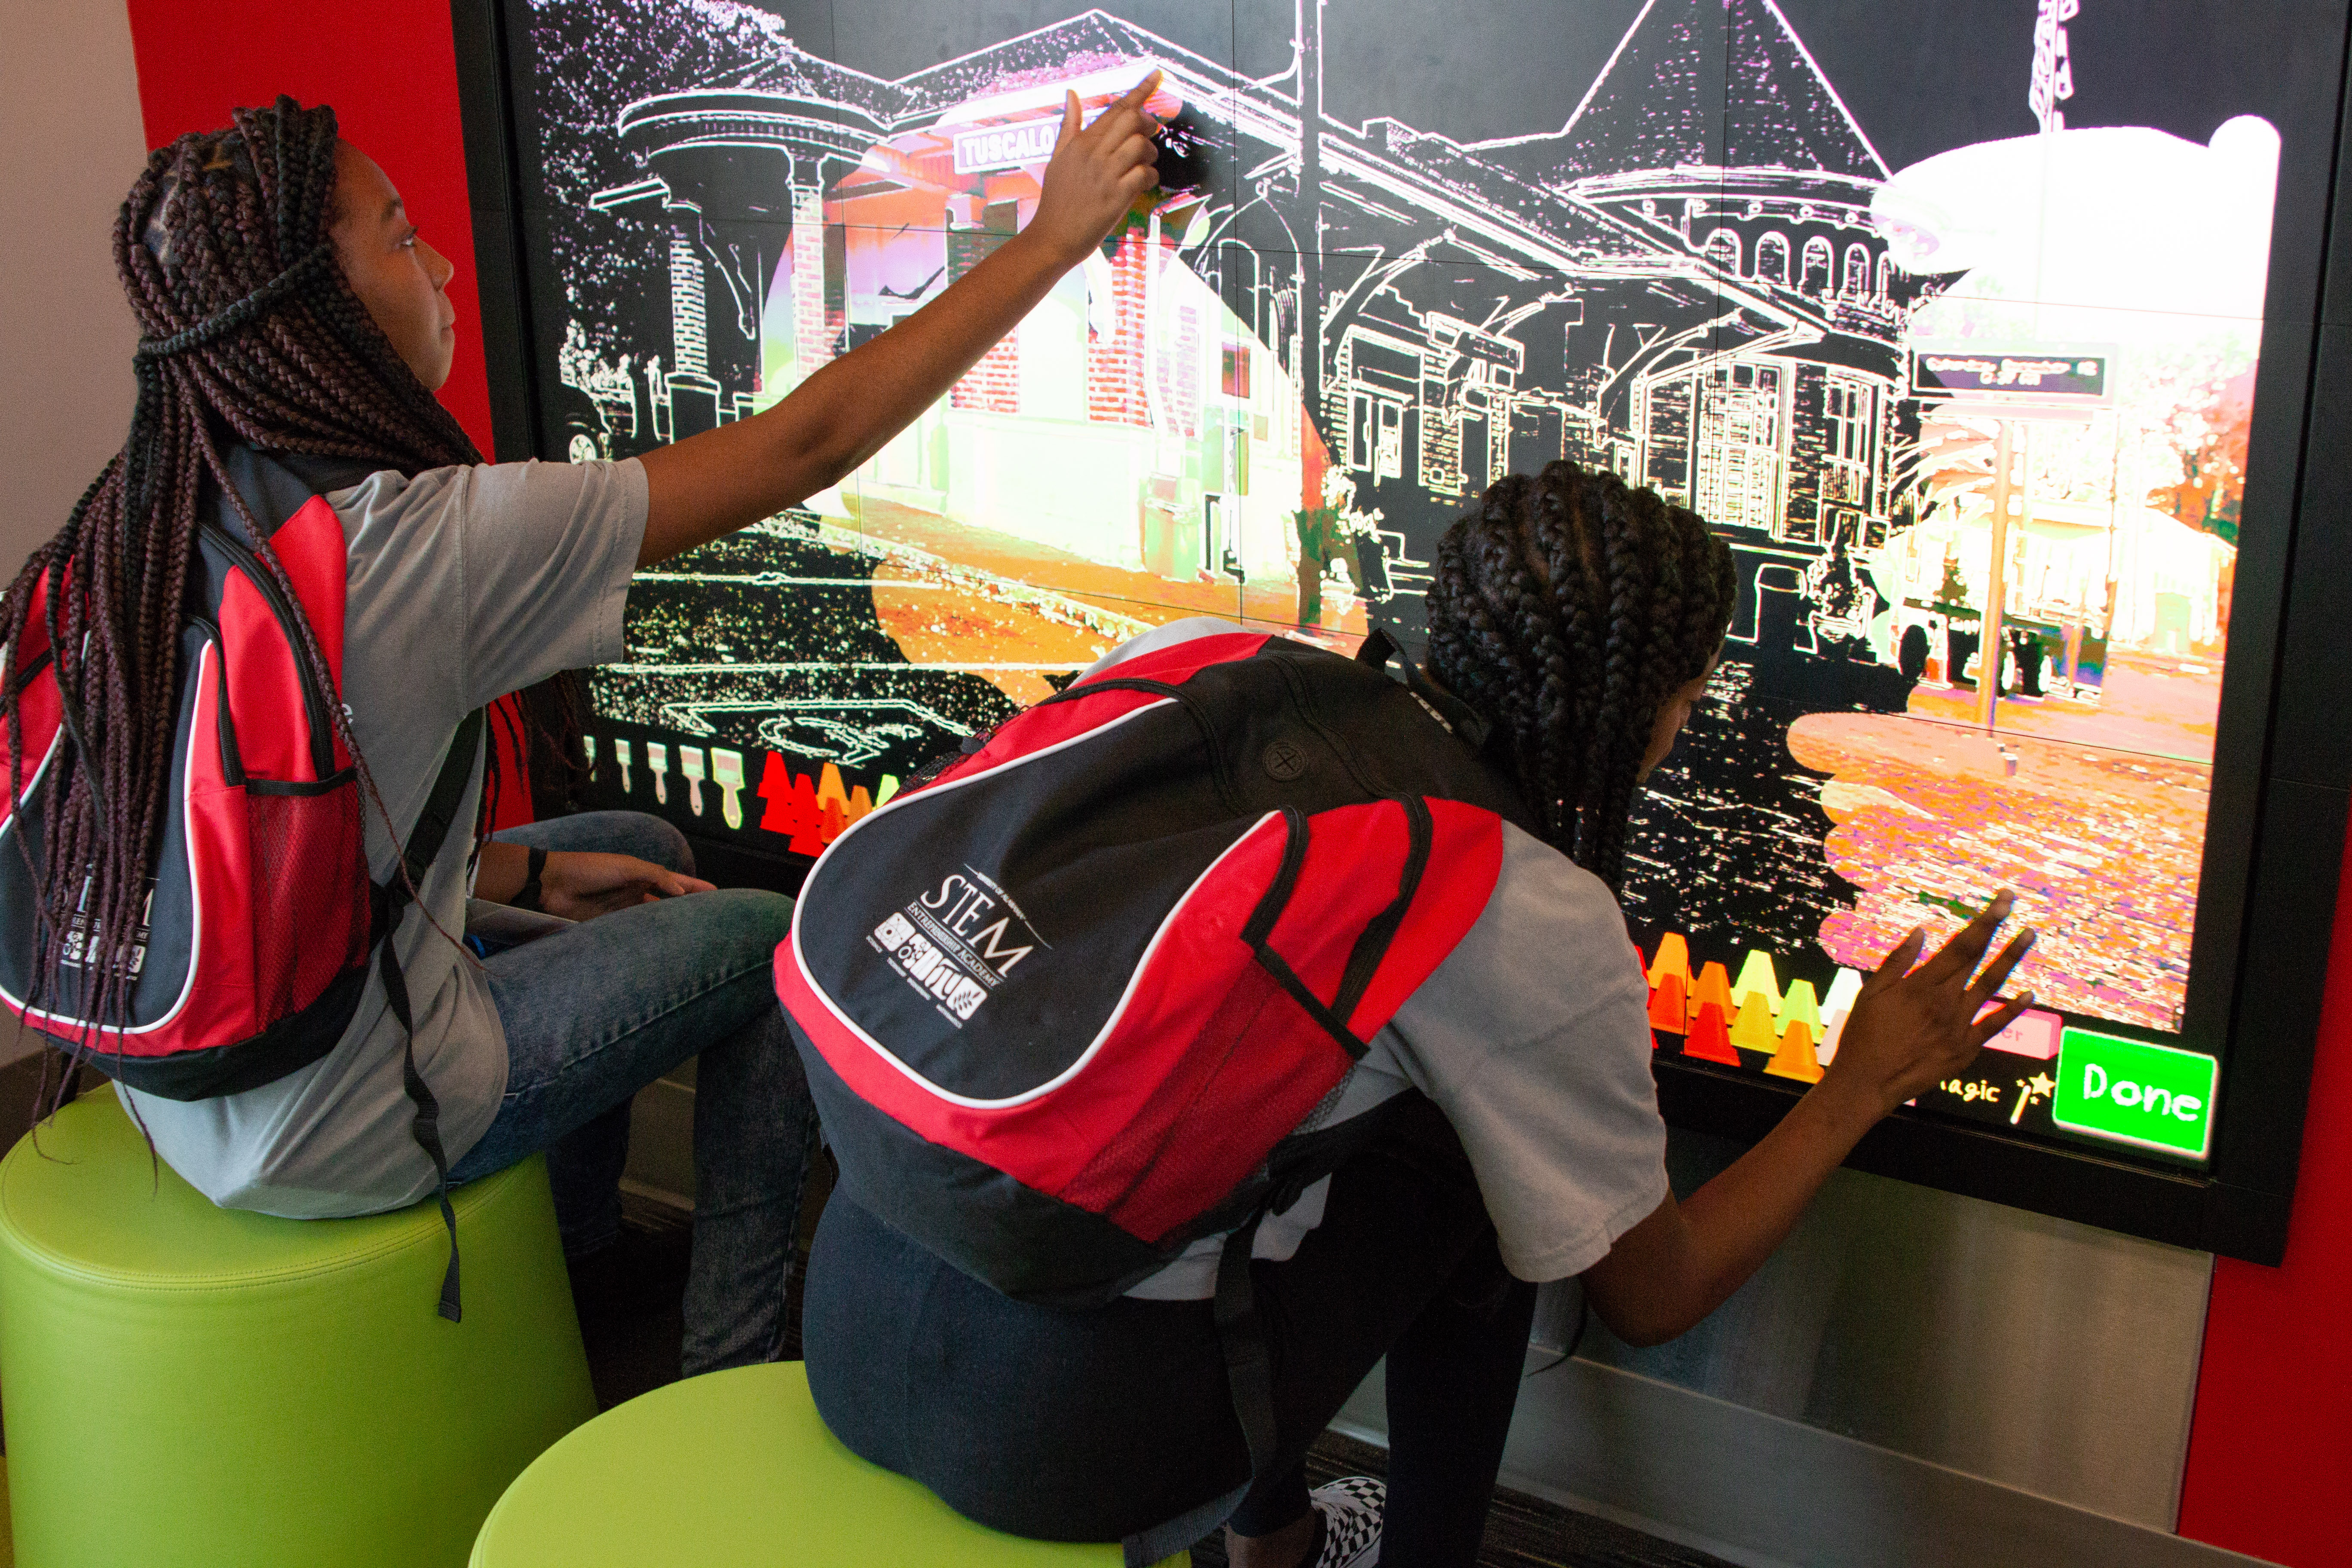 The Coloring Wall, located in the Children’s Exploration Room, is a hit with children of all ages, including those who spent time at The Gateway to Discovery during their STEM Academy week.